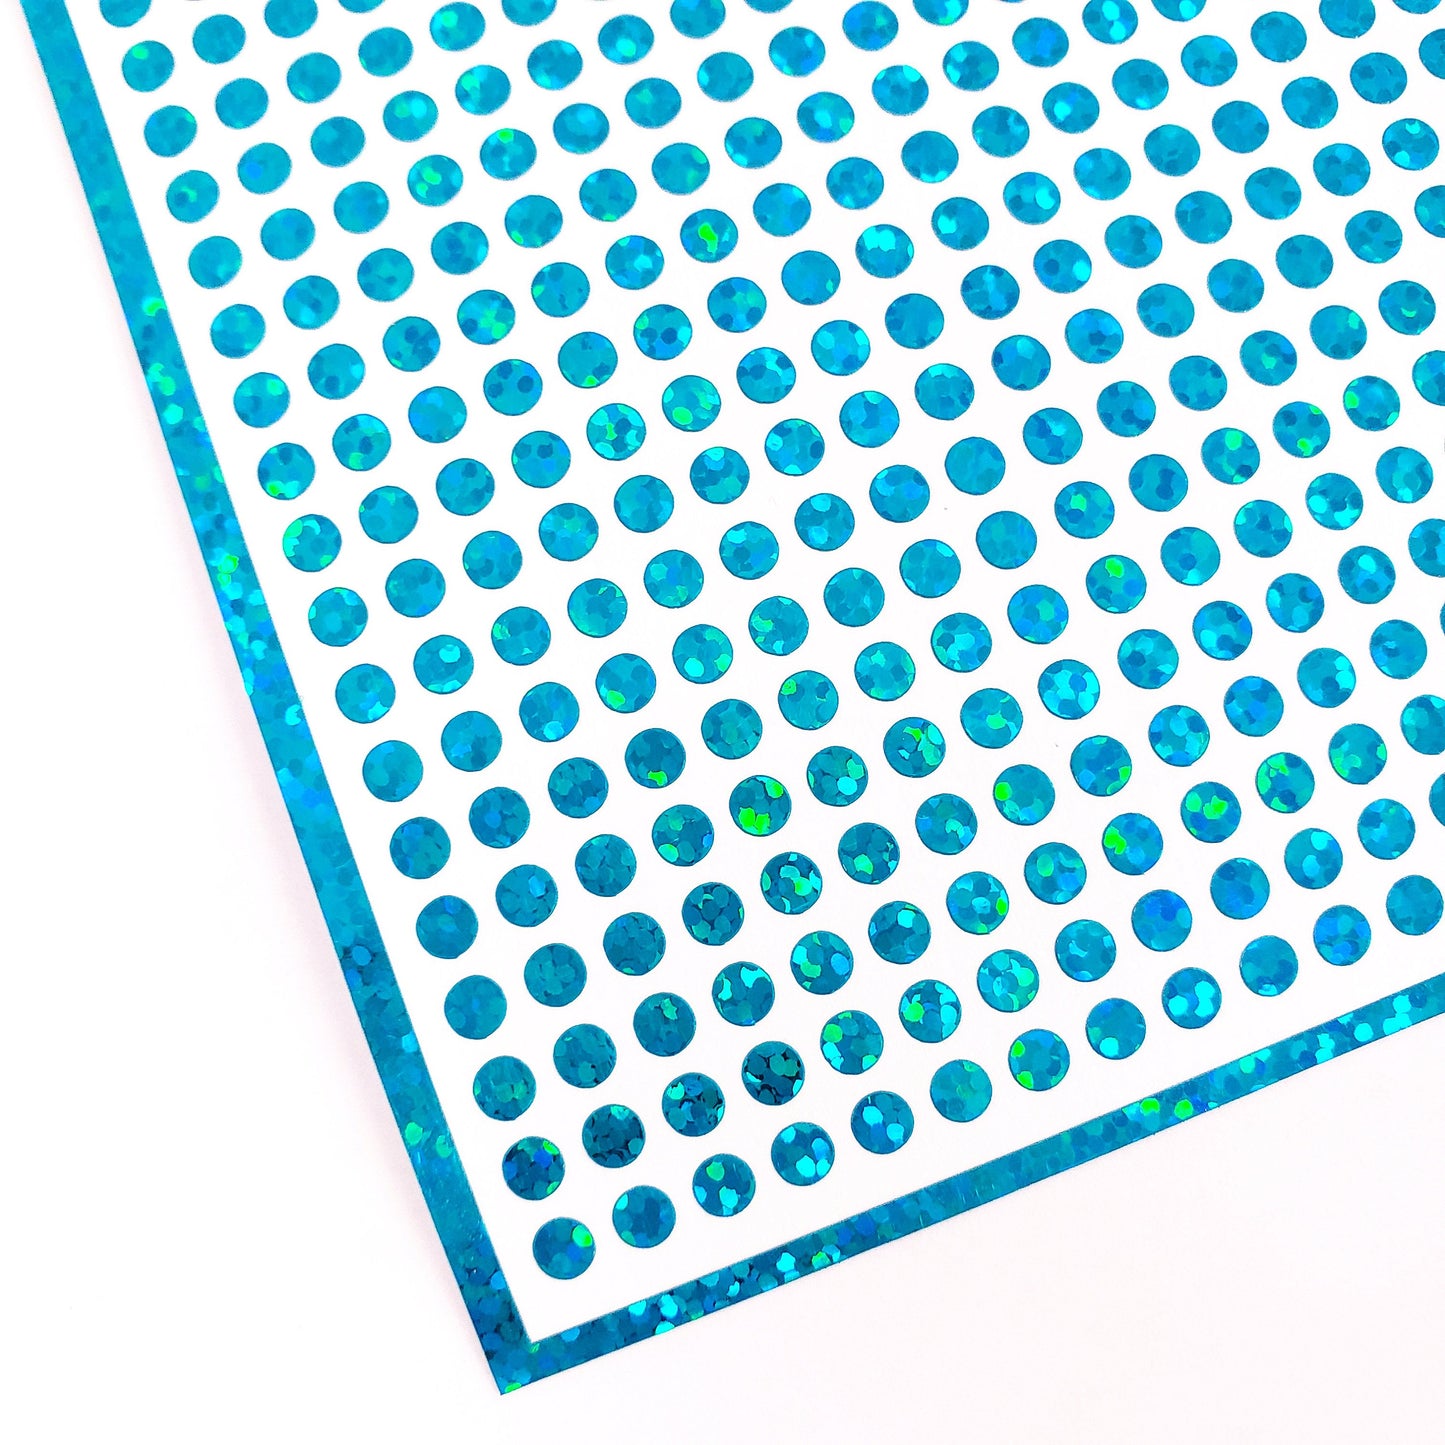 Extra Small Teal Glitter Dot Stickers. Set of 750 micro sized turquoise dots for journals, planners, goal trackers, calendars and crafts.